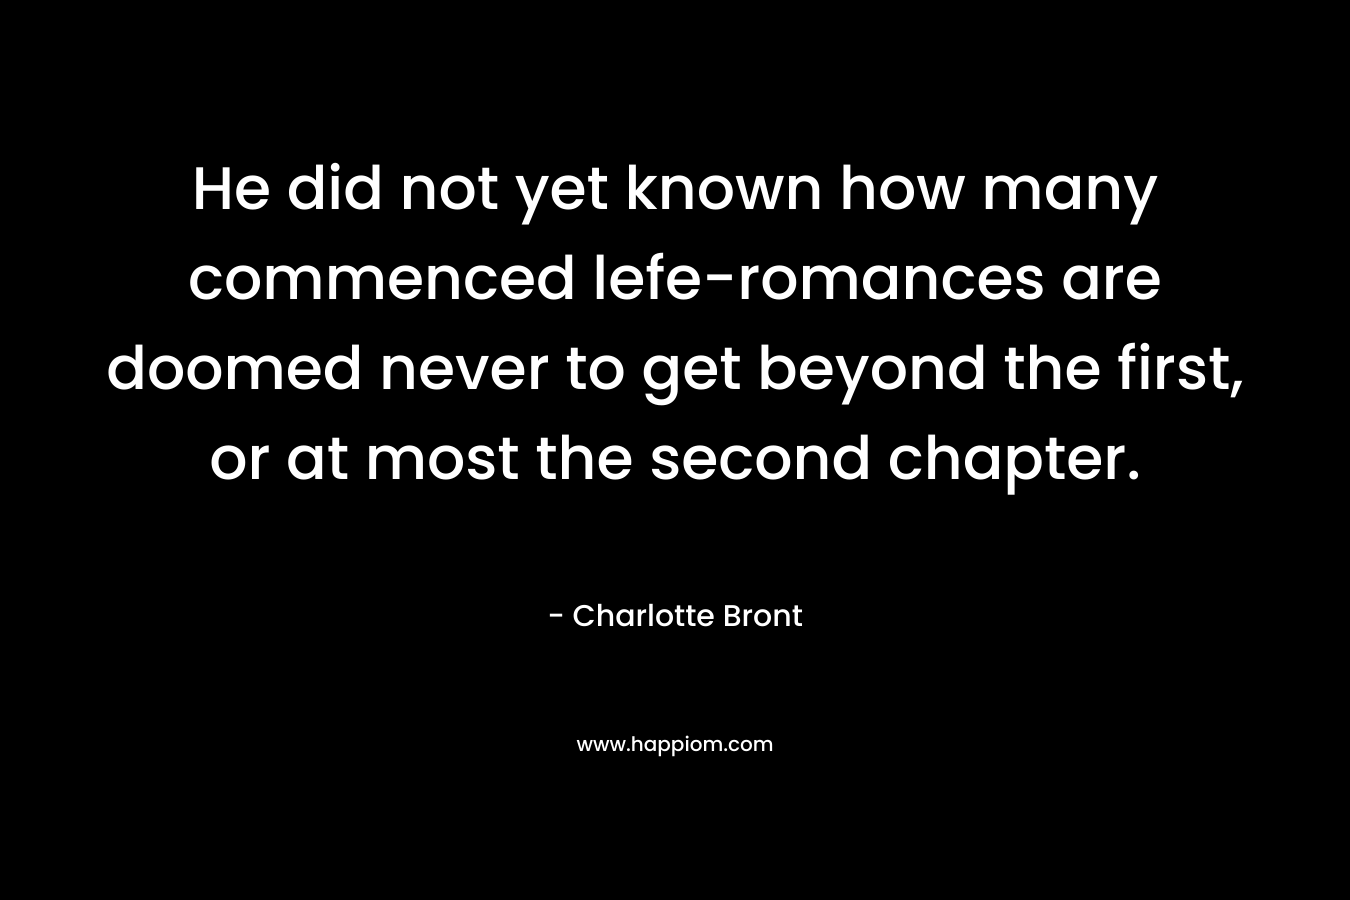 He did not yet known how many commenced lefe-romances are doomed never to get beyond the first, or at most the second chapter. – Charlotte Bront